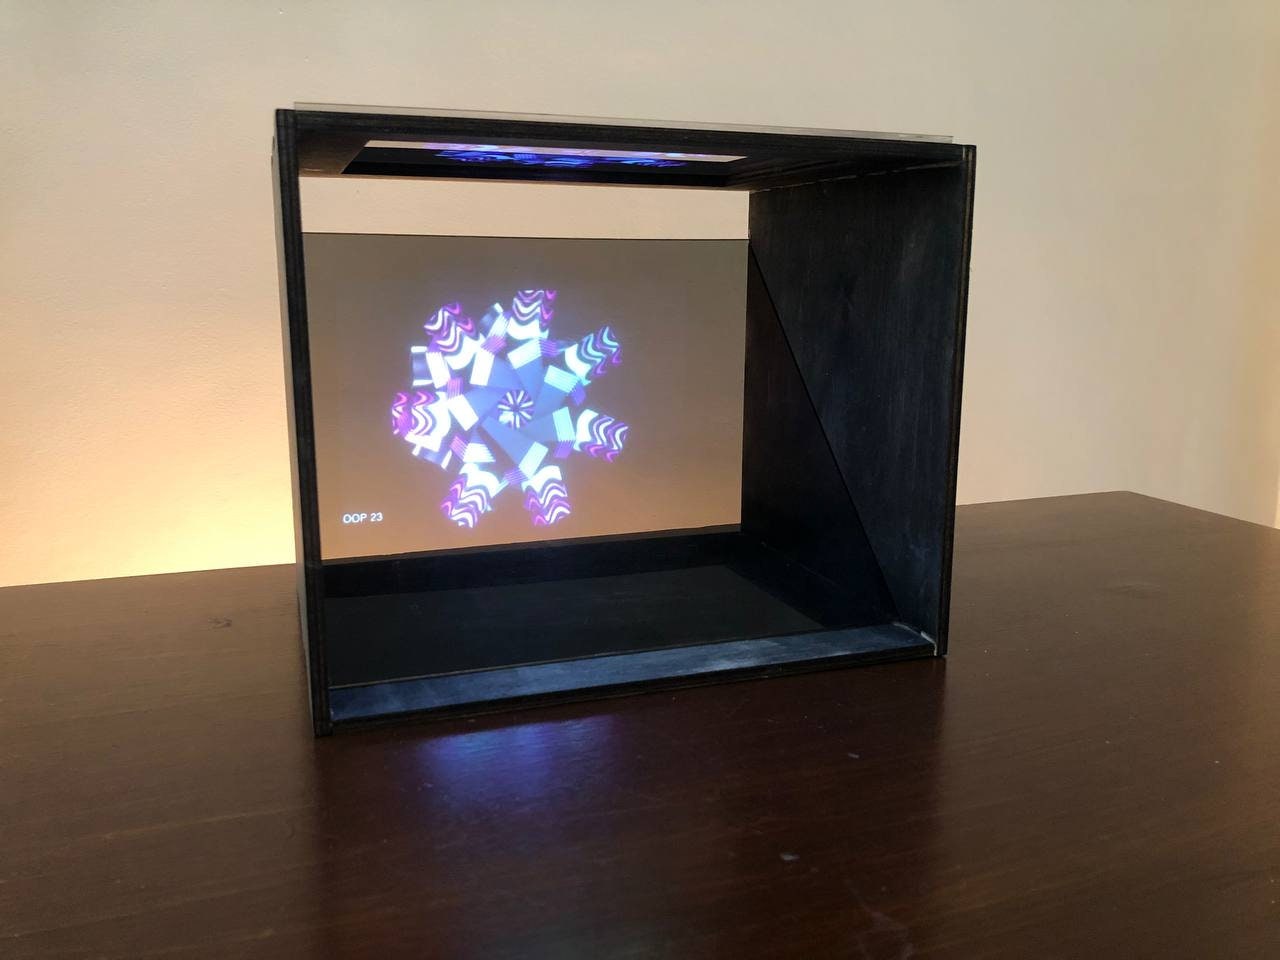 Best DIY 3D Hologram Projector Made from Plastic Sheet - Craft projects for  every fan!